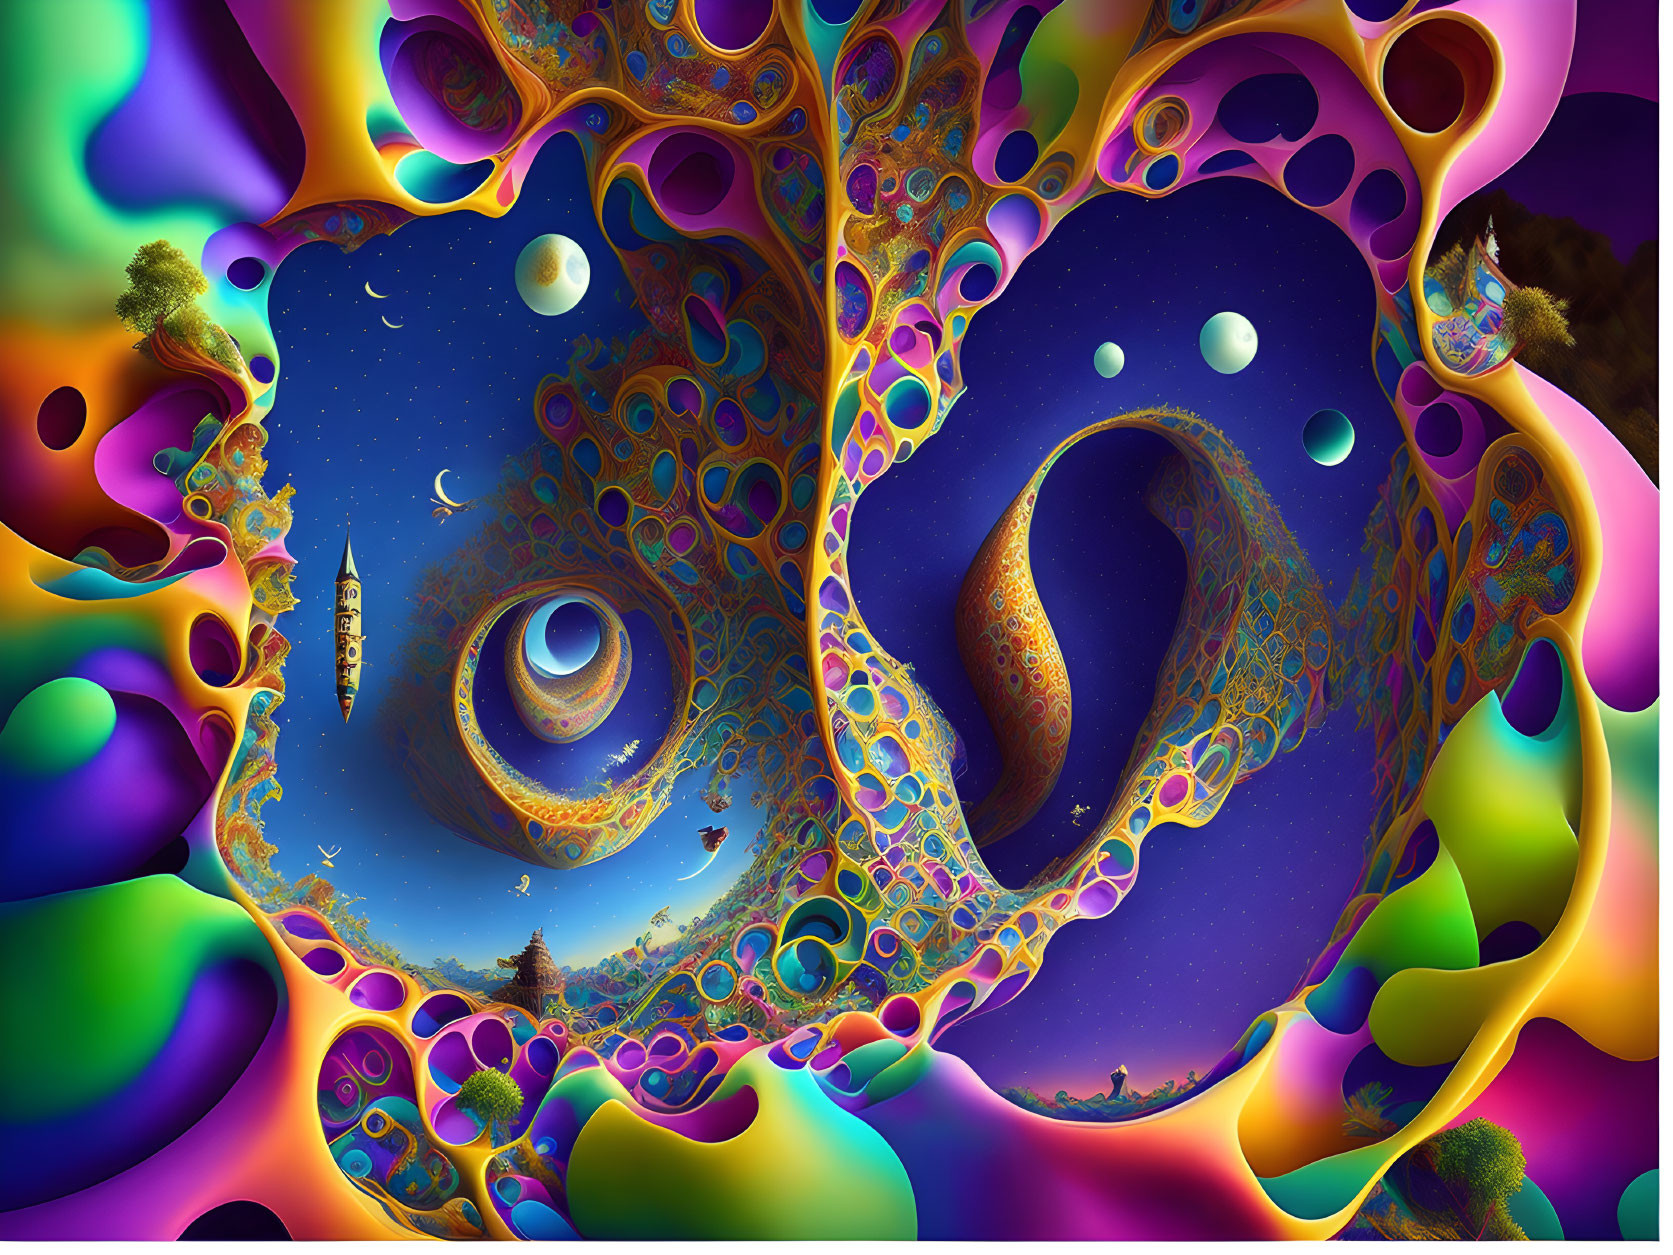 Colorful Fractal Image with Swirling Patterns and Abstract Shapes